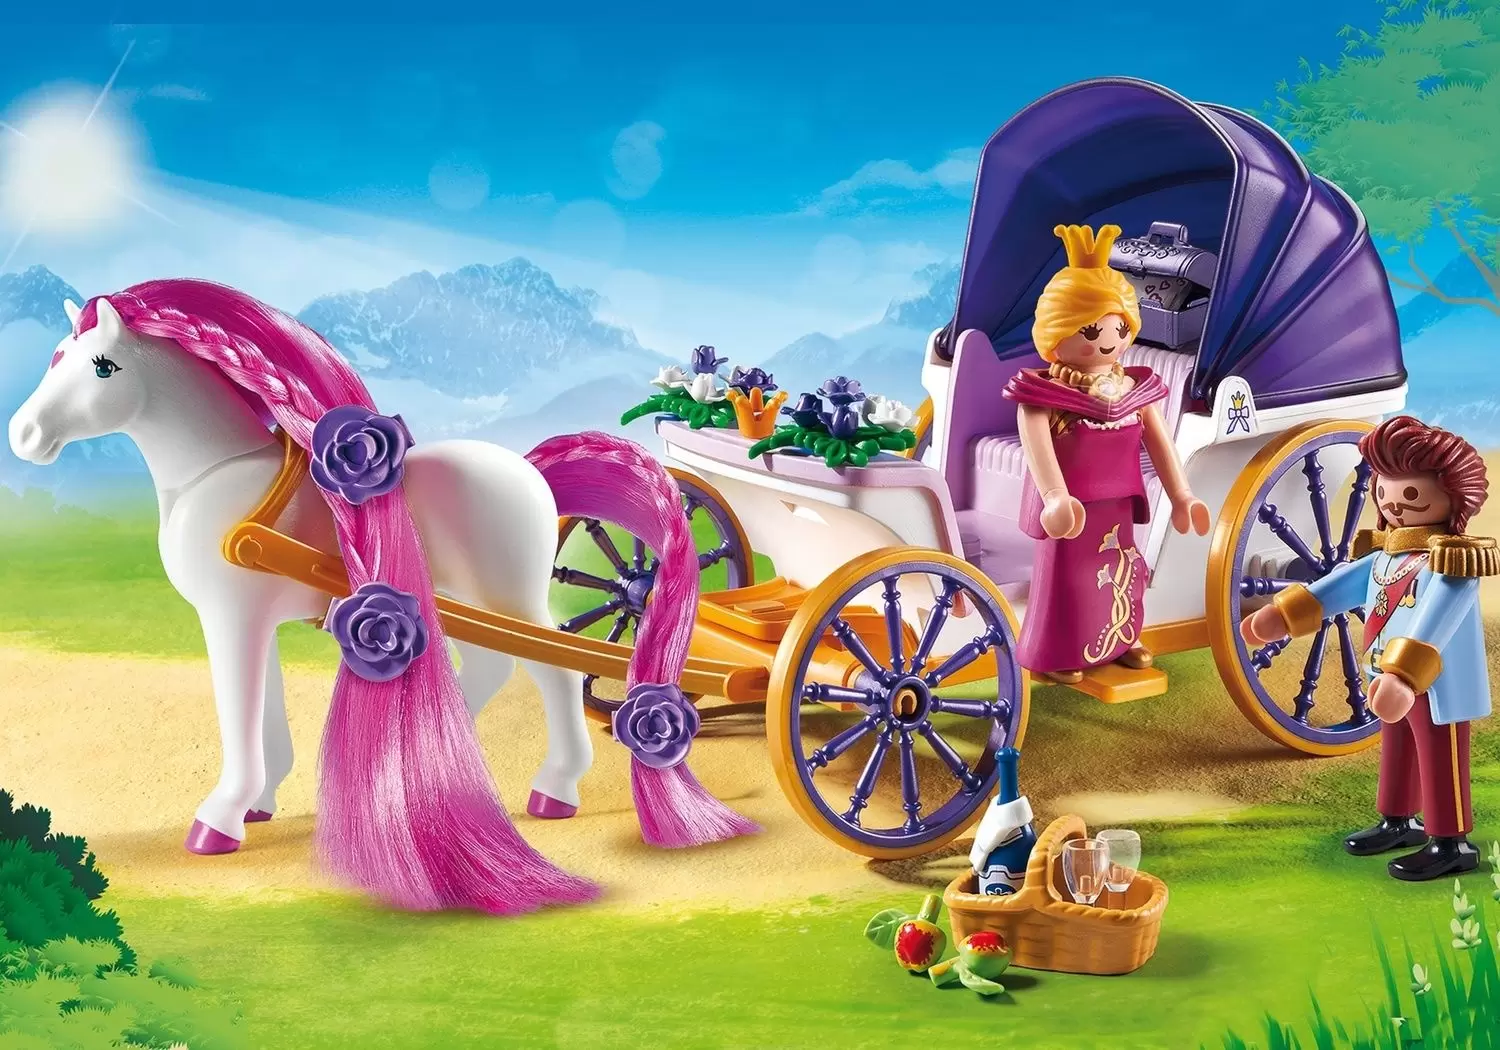 Playmobil Princess - Royal Couple with horse-drawn carriage